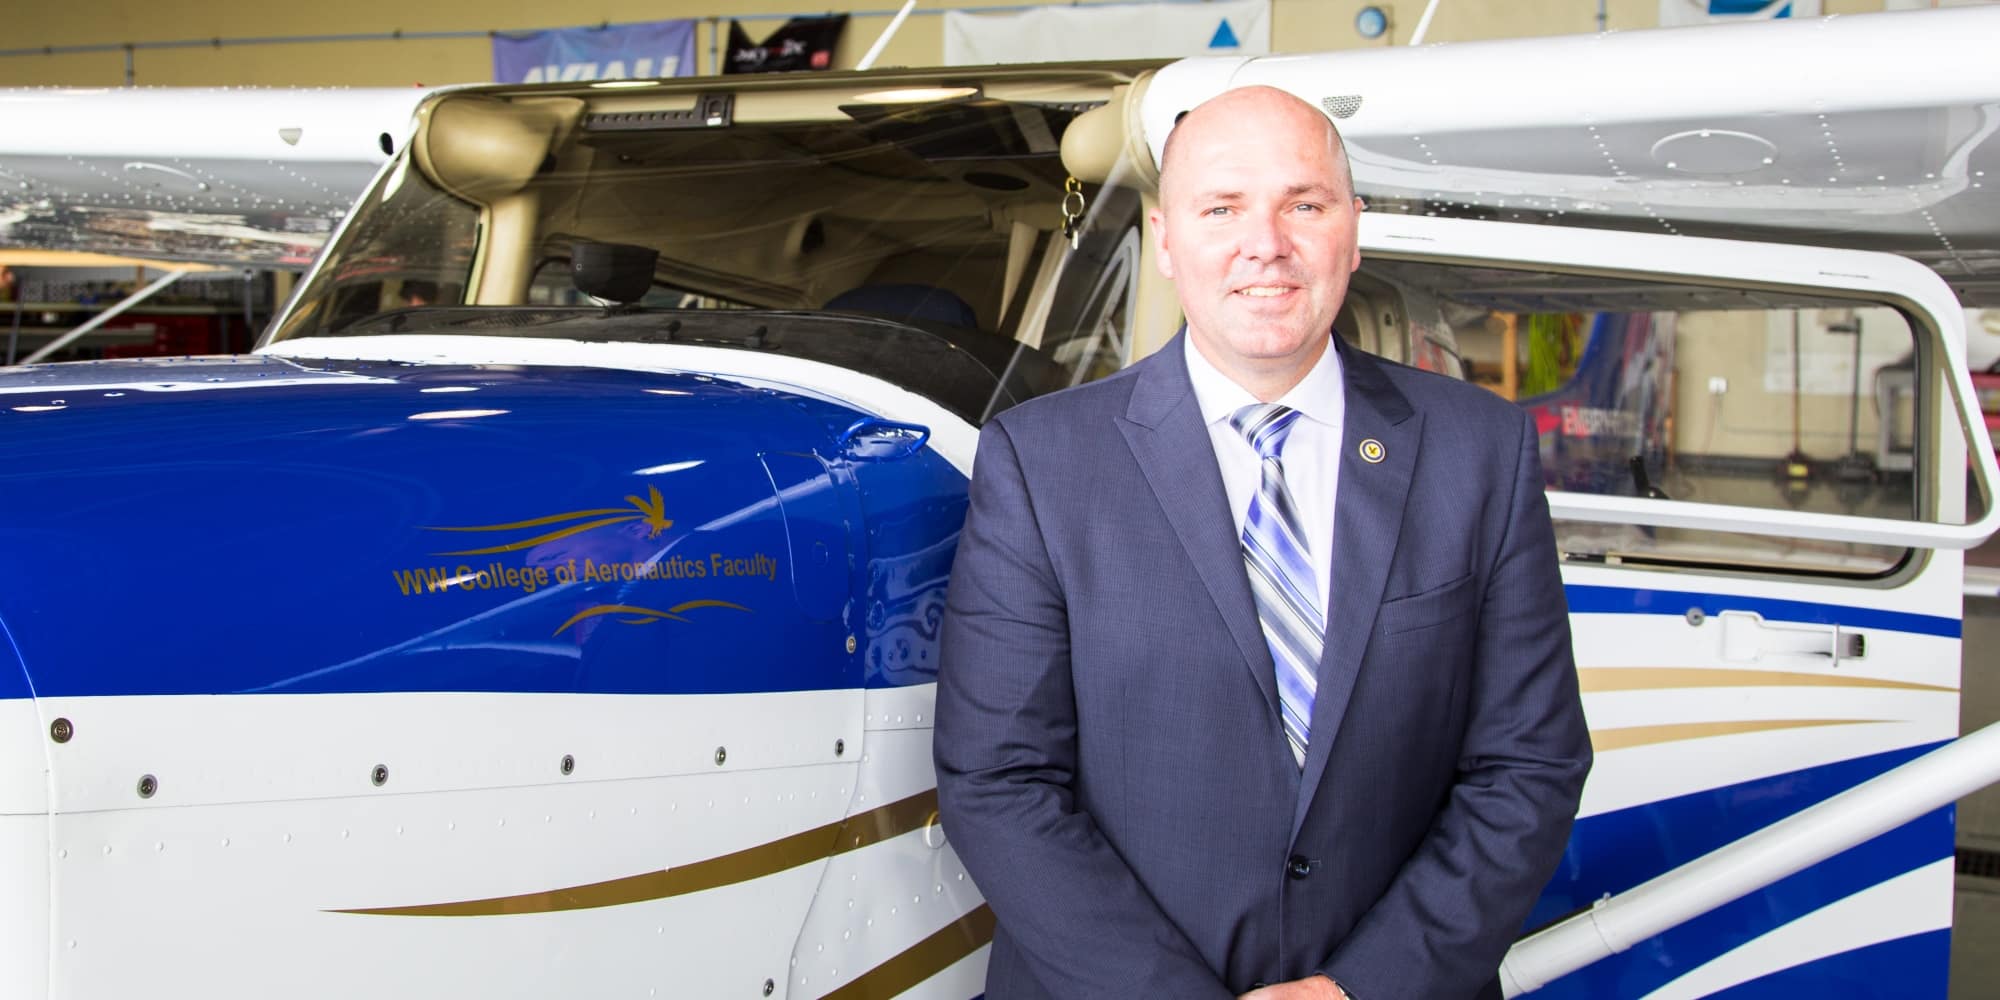 Dr. Ken Witcher has served 20 years in the U.S. Air Force before becoming Dean and Associate Professor for Embry-Riddle Worldwide's College of Aeronautics